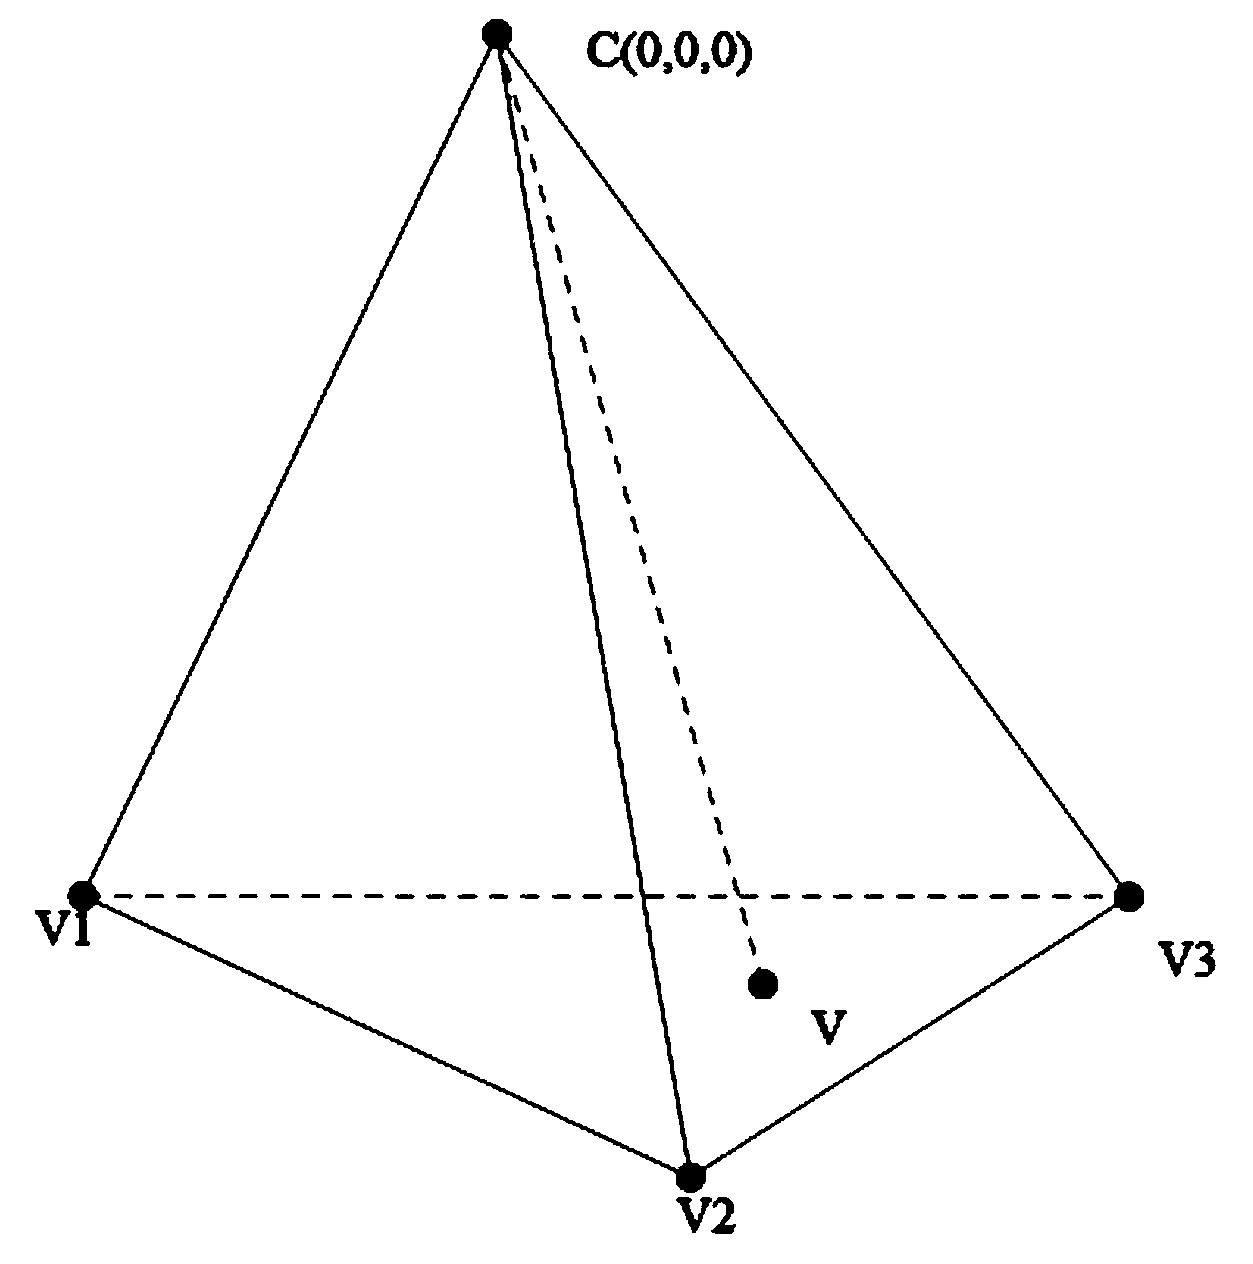 Complicated three-dimensional model drawing method based on images